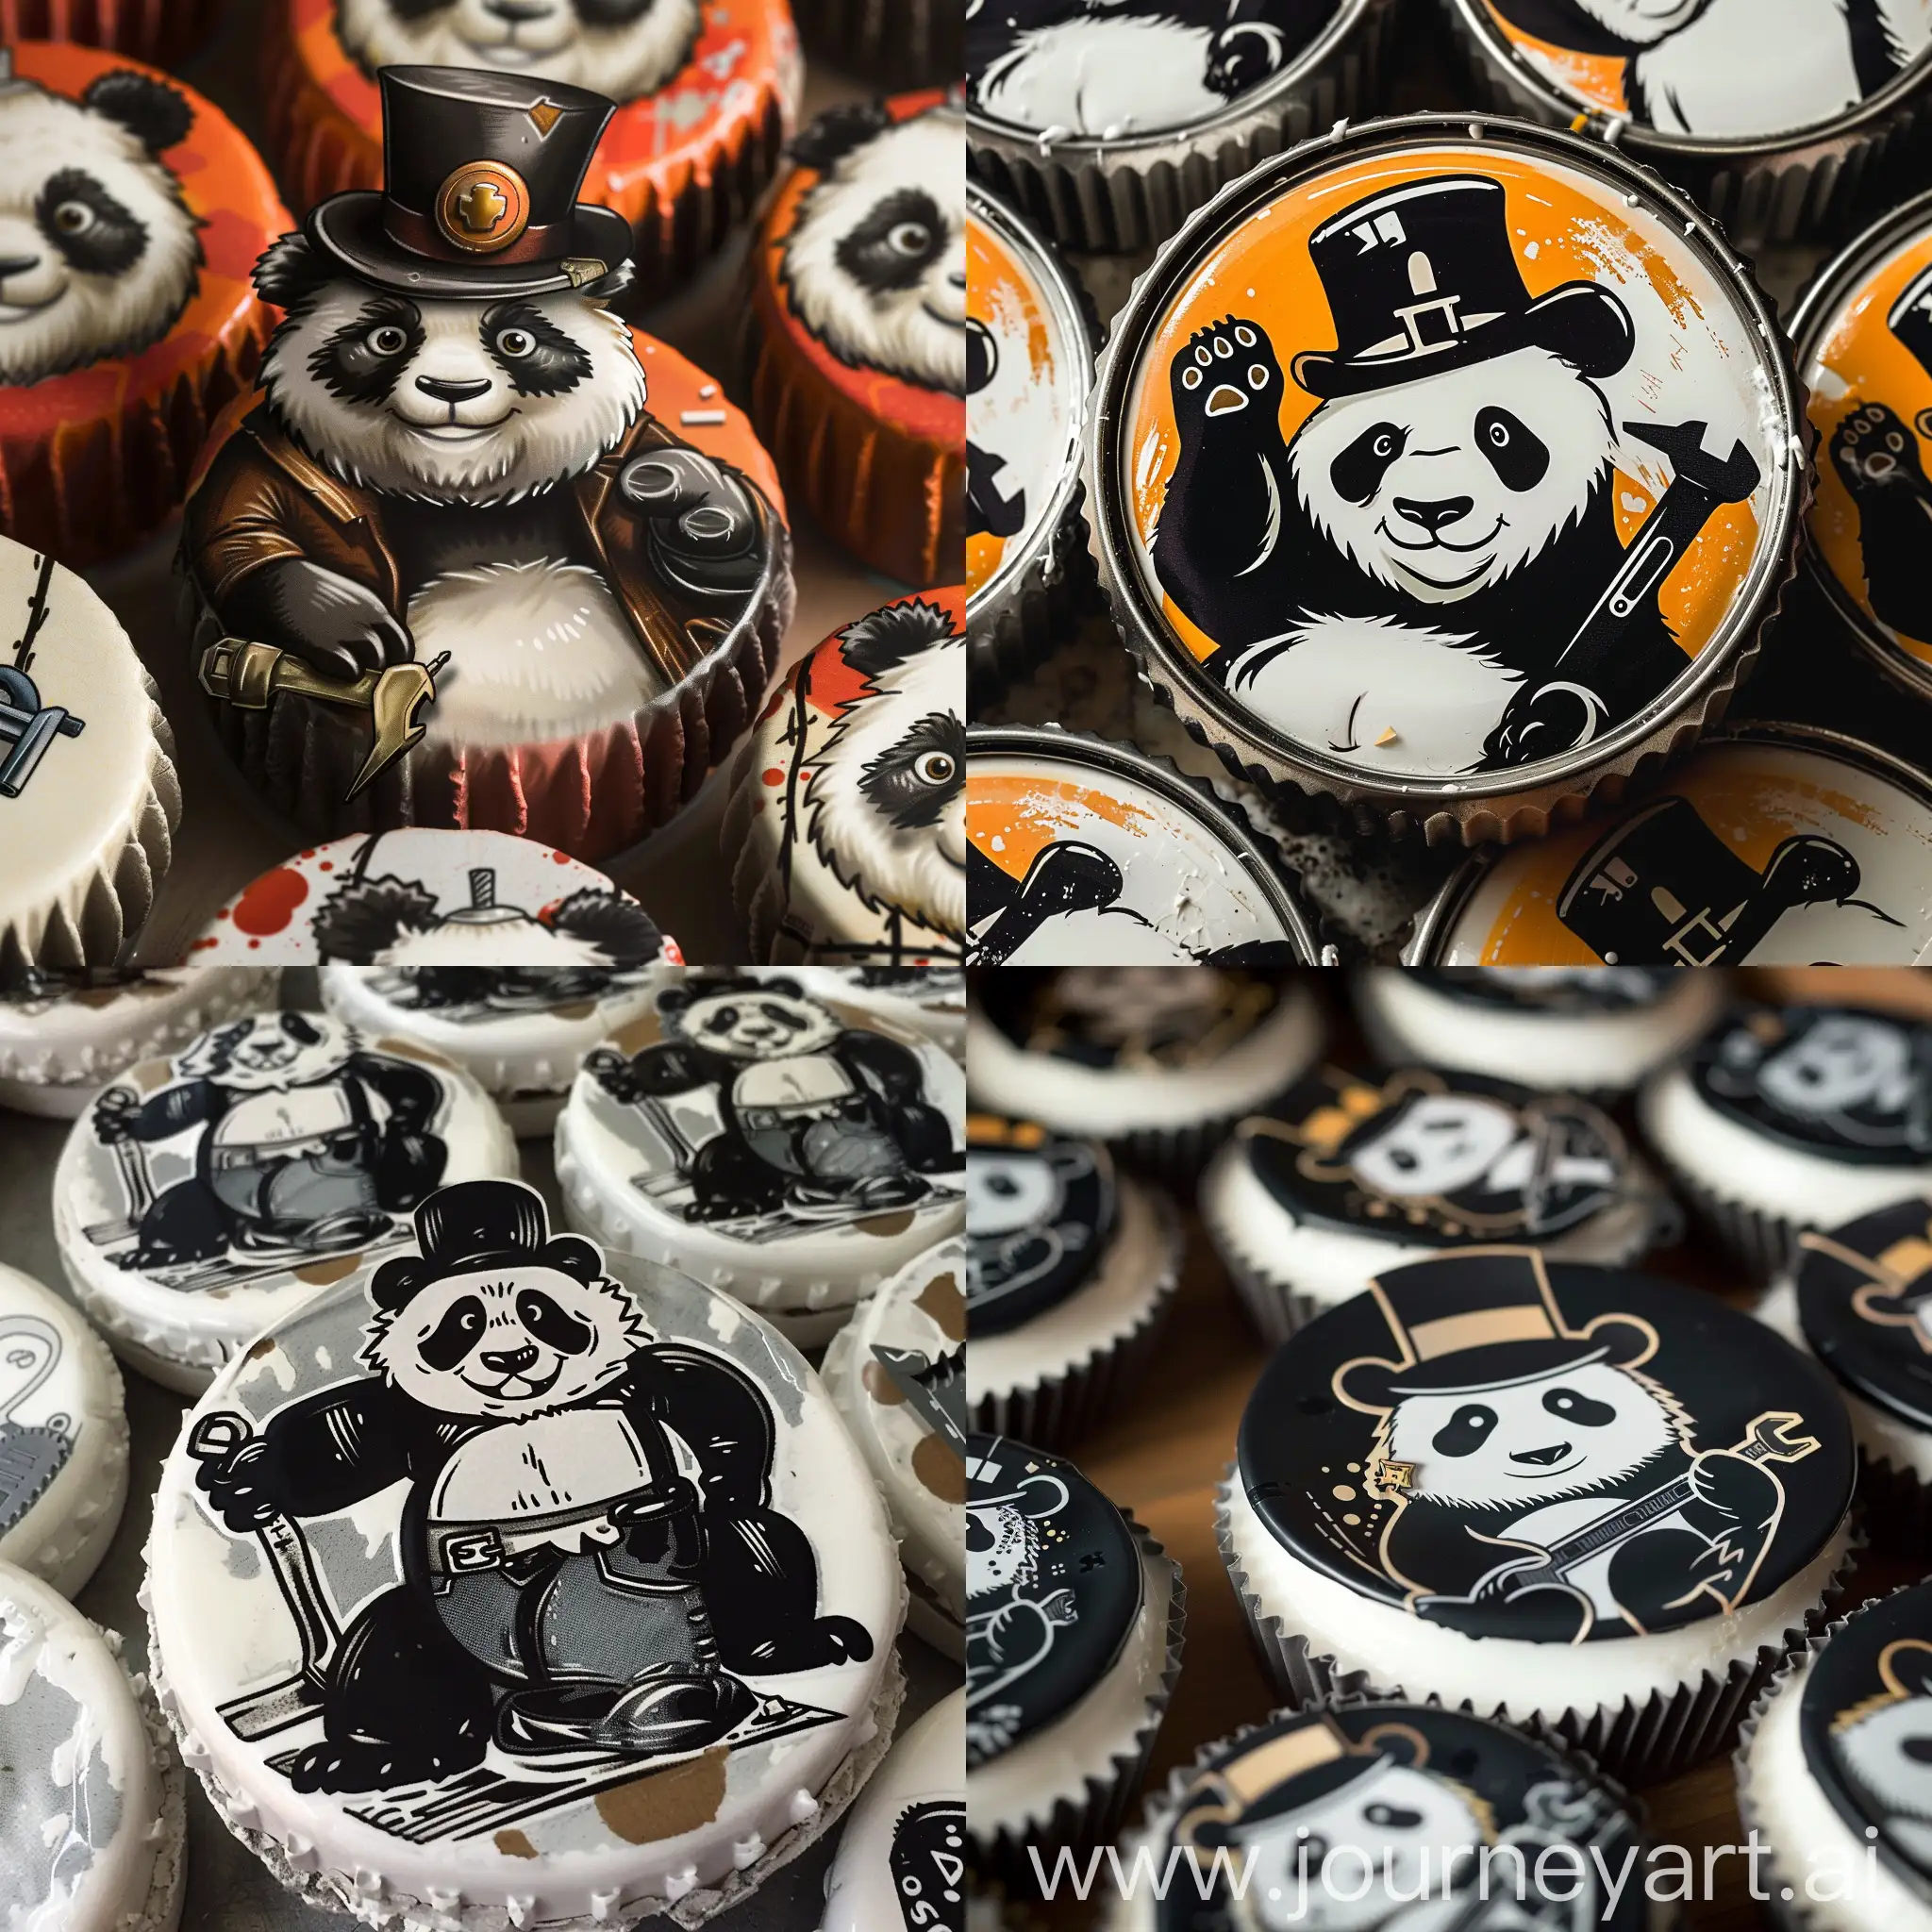 Illustration on milk caps of  panda in a top hat with a wrench in his hand